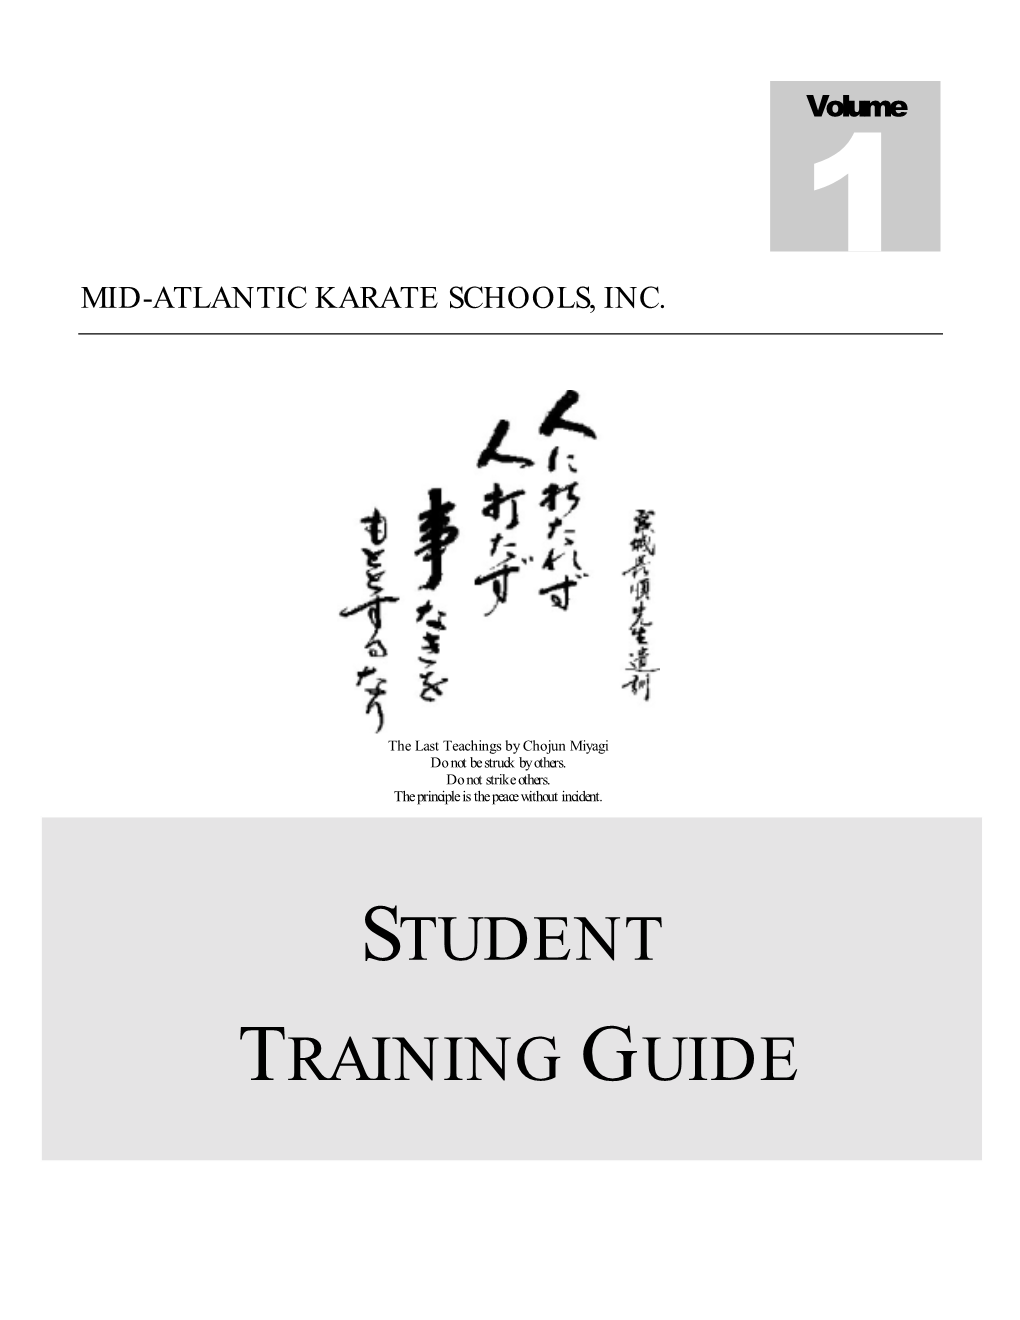 Student Training Guide